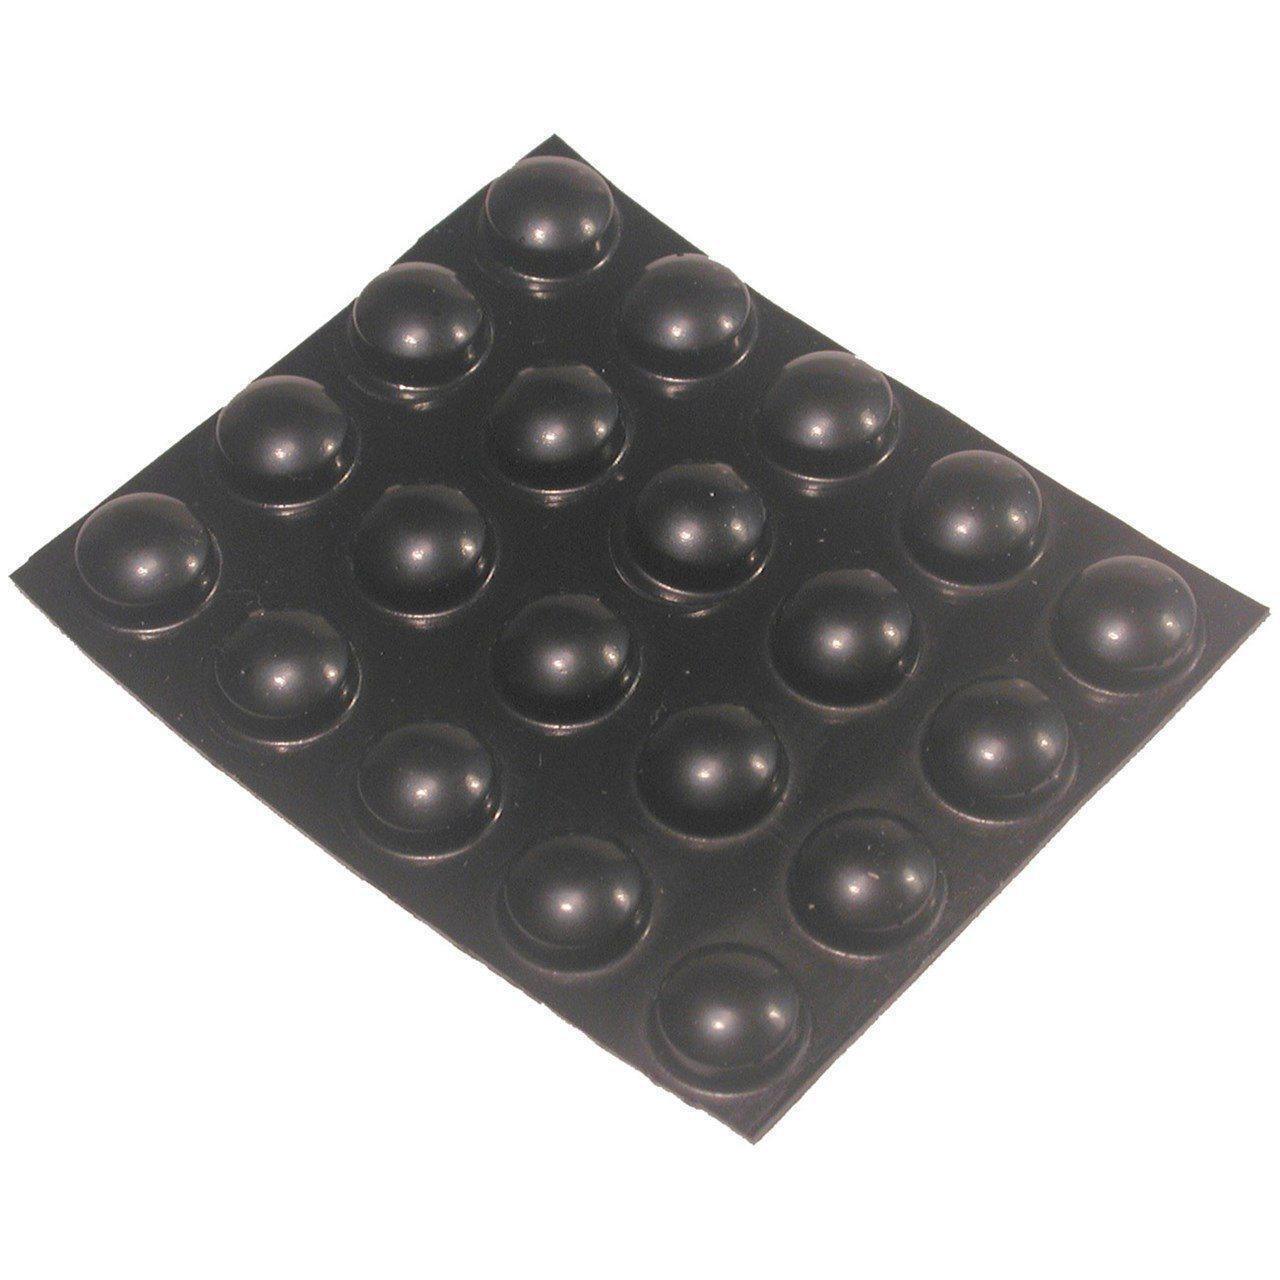 Bump Dots - Small, Black round or FLAT - 20 per package